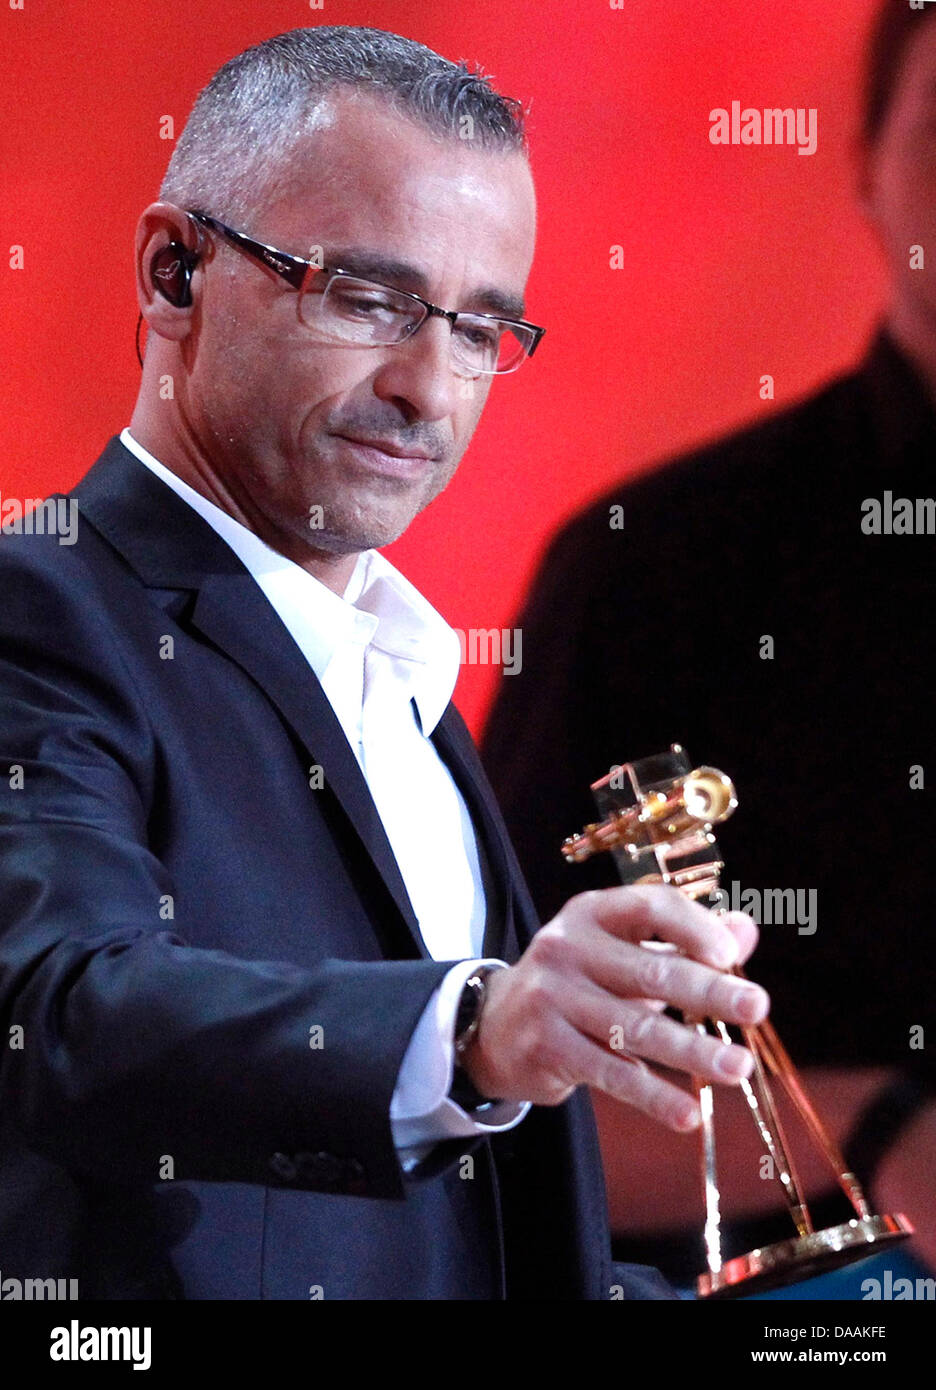 Italian singer Eros Ramazzotti holds his trophy for best international music artist during the 46th Golden Camera award ceremony in Berlin, Germany, 5 February 2011. The award honours the audience's favourites from film, television, sports and media. Photo: Tobias Schwarz dpa/lbn Stock Photo